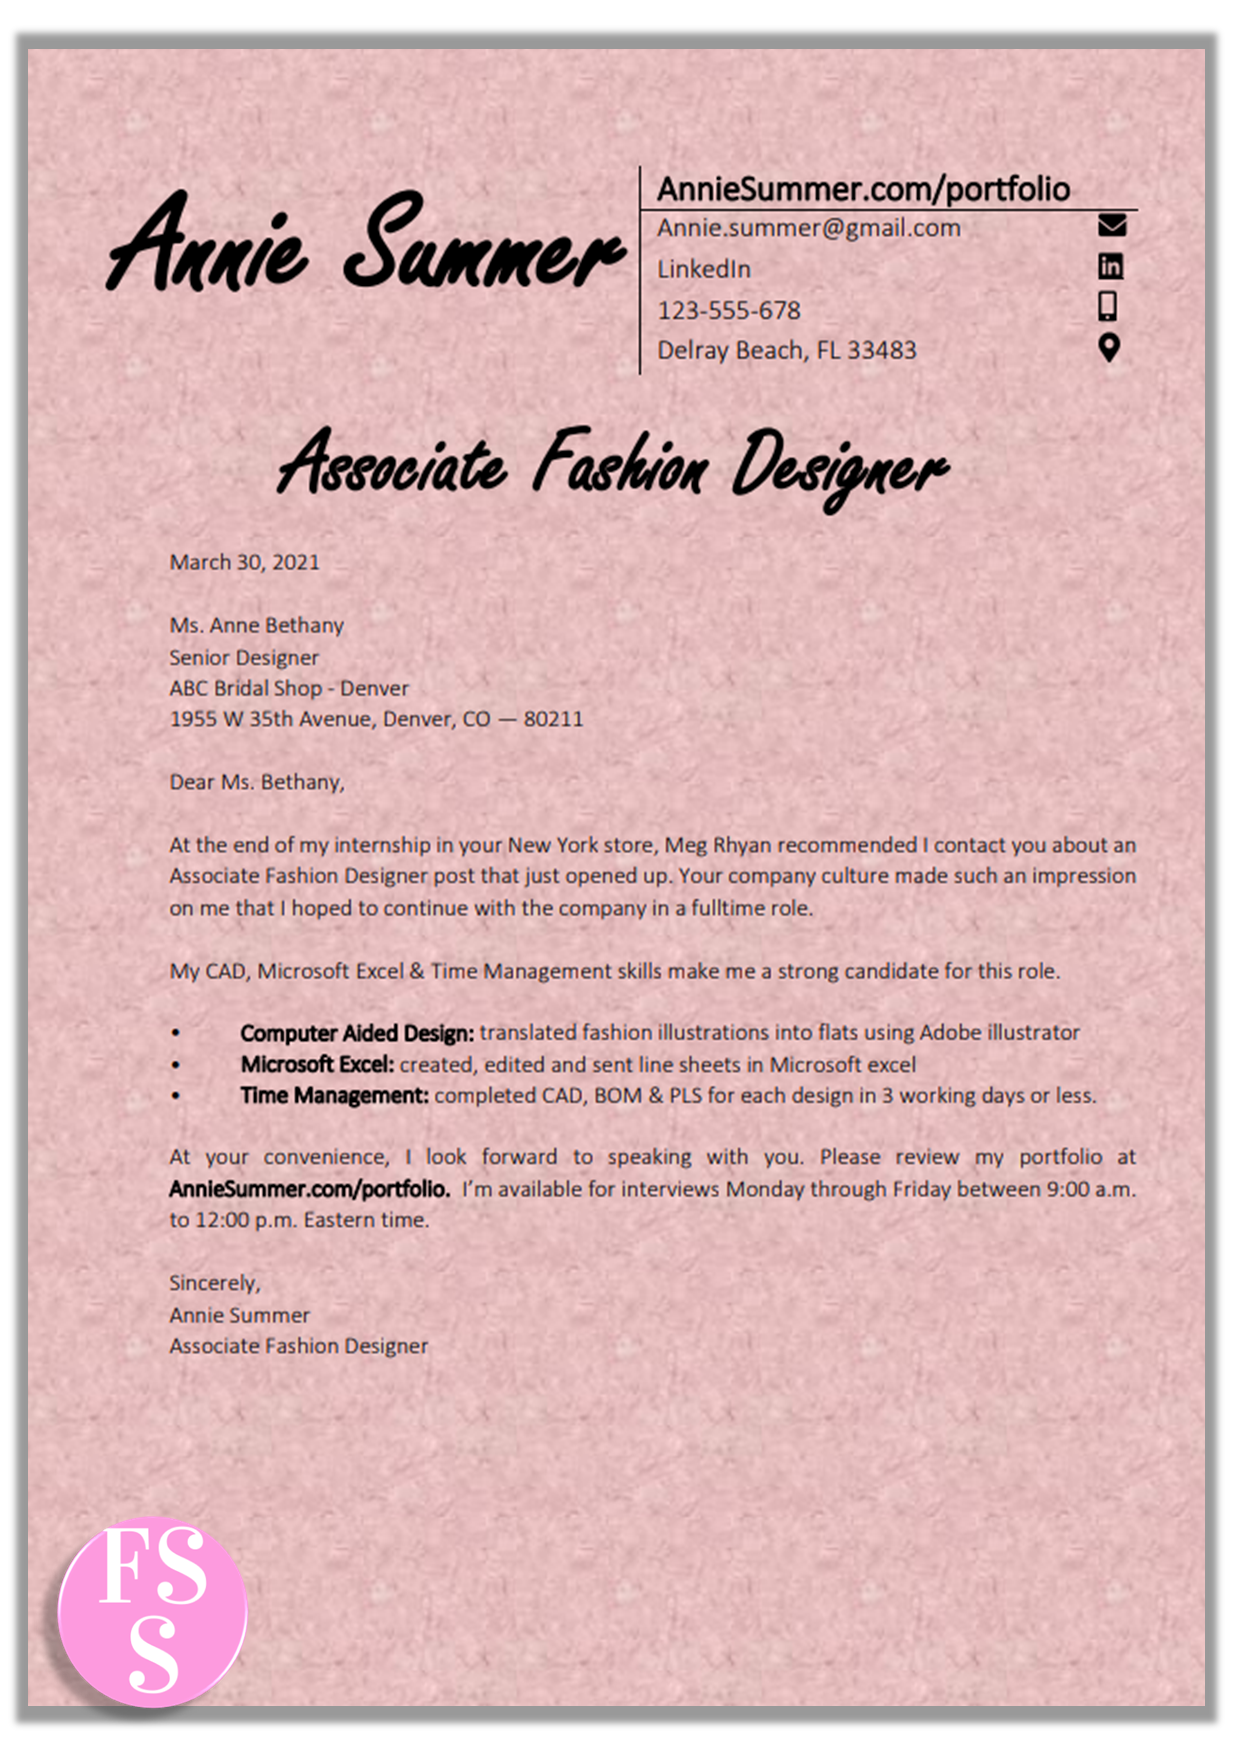 Fashion Designer Cover Letter sample & template on pink tissue paper. 12-point font. These examples are perfect for senior, assistant or freelance fashion designer applications.